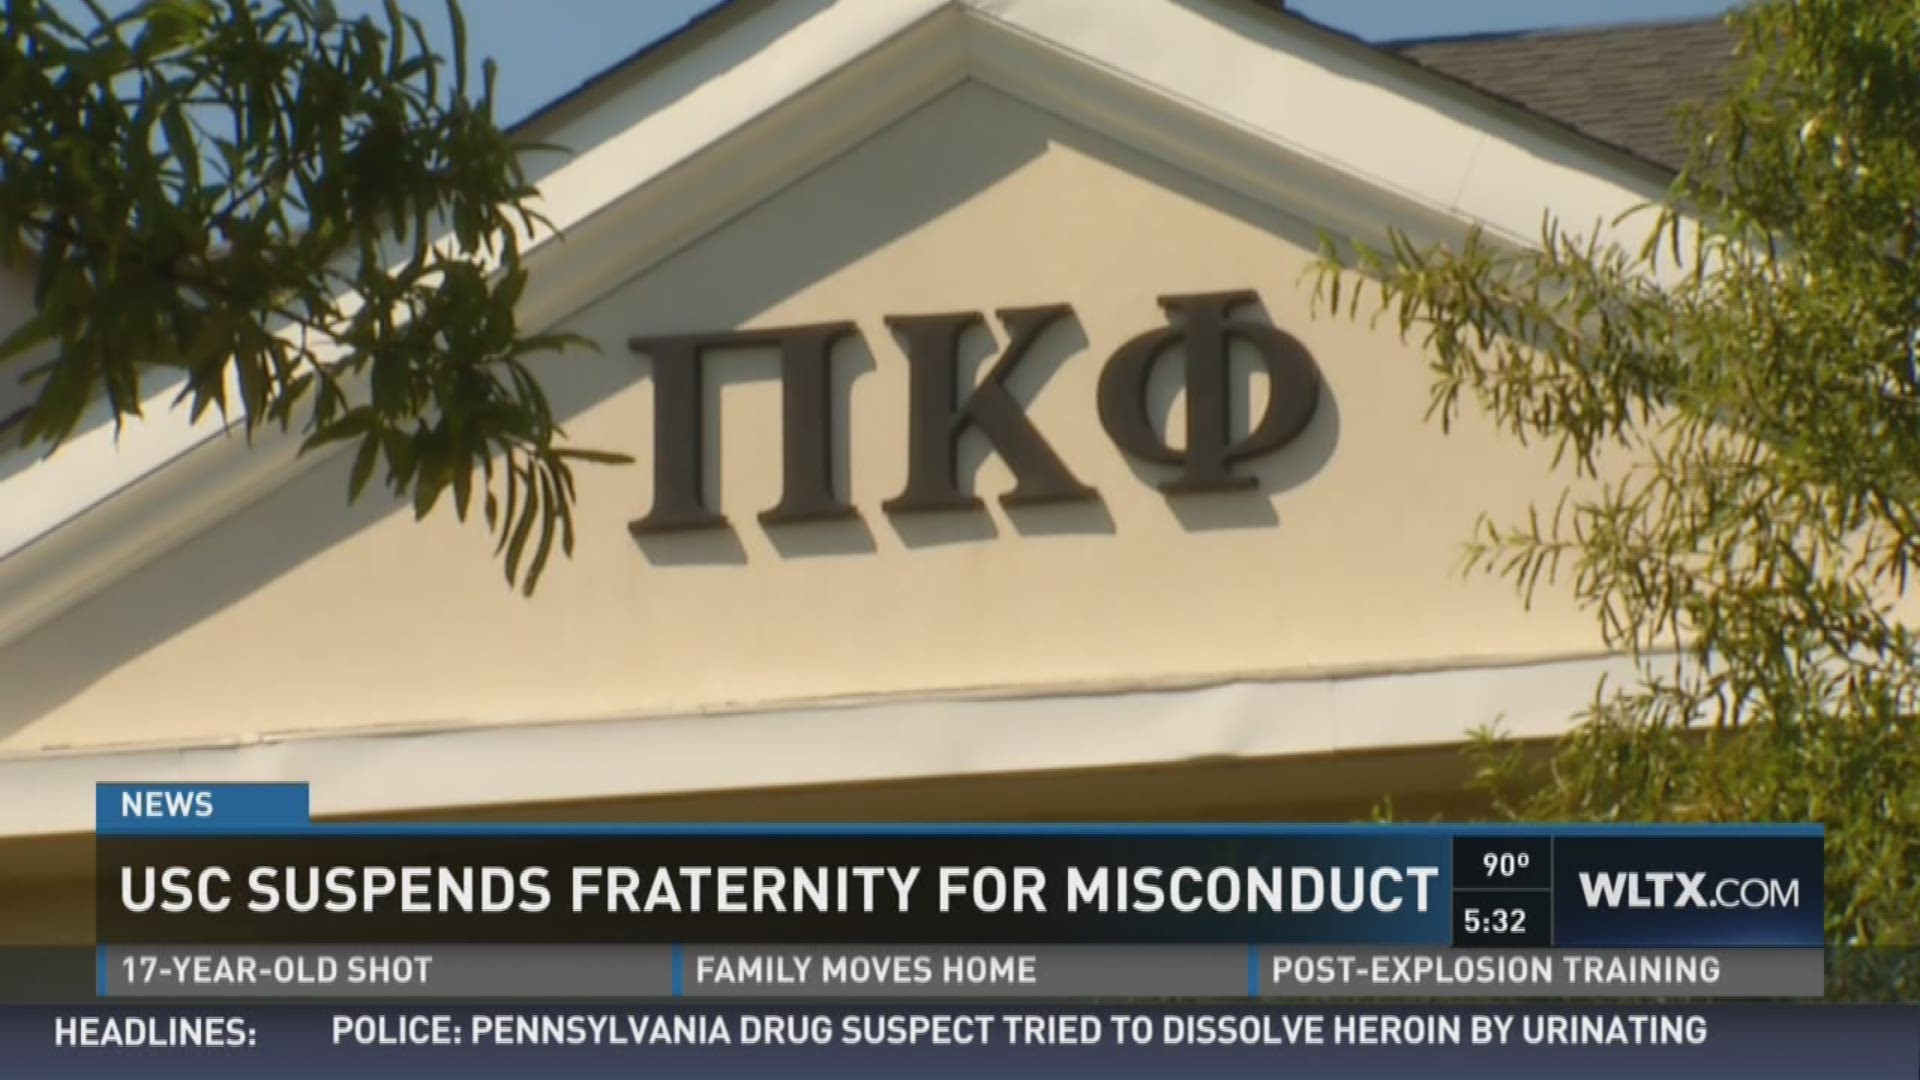 USC suspends fraternity for misconduct 